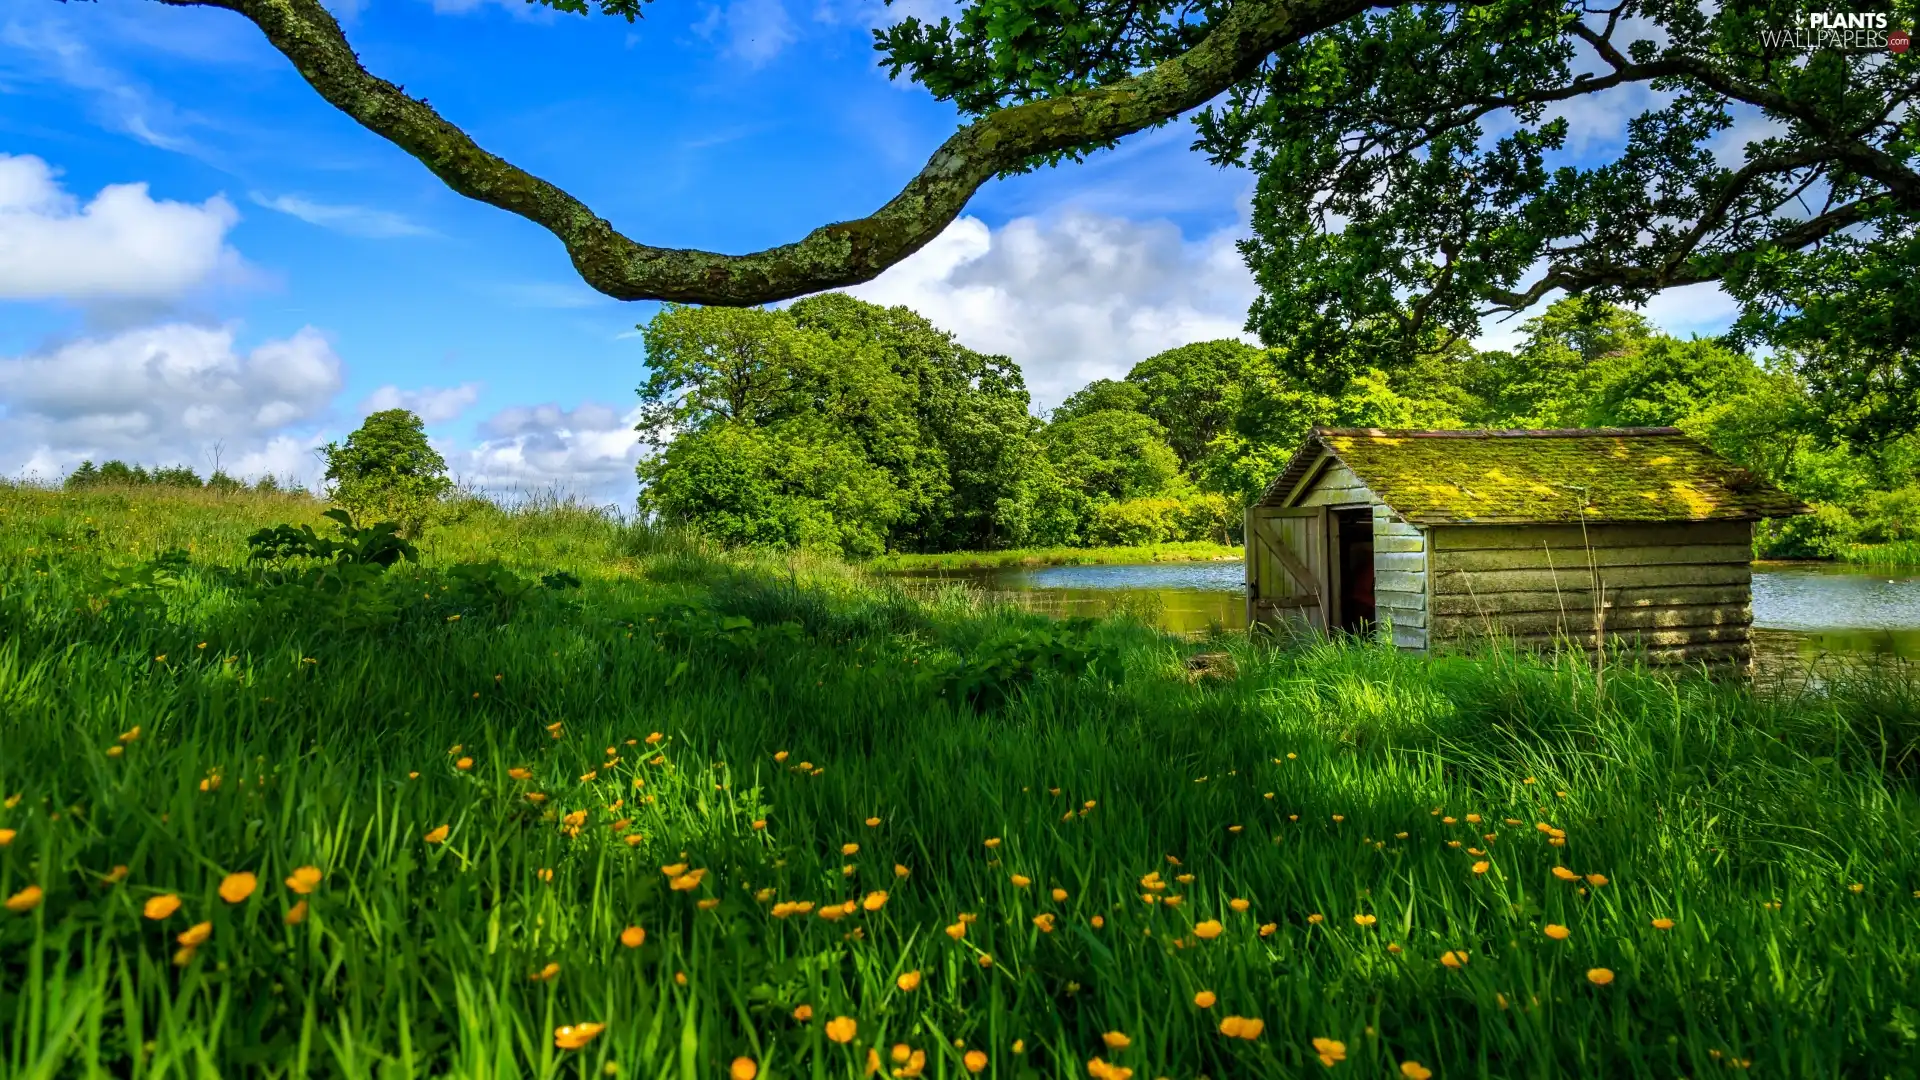 Meadow, Home, trees, lake, wooden, Flowers, viewes